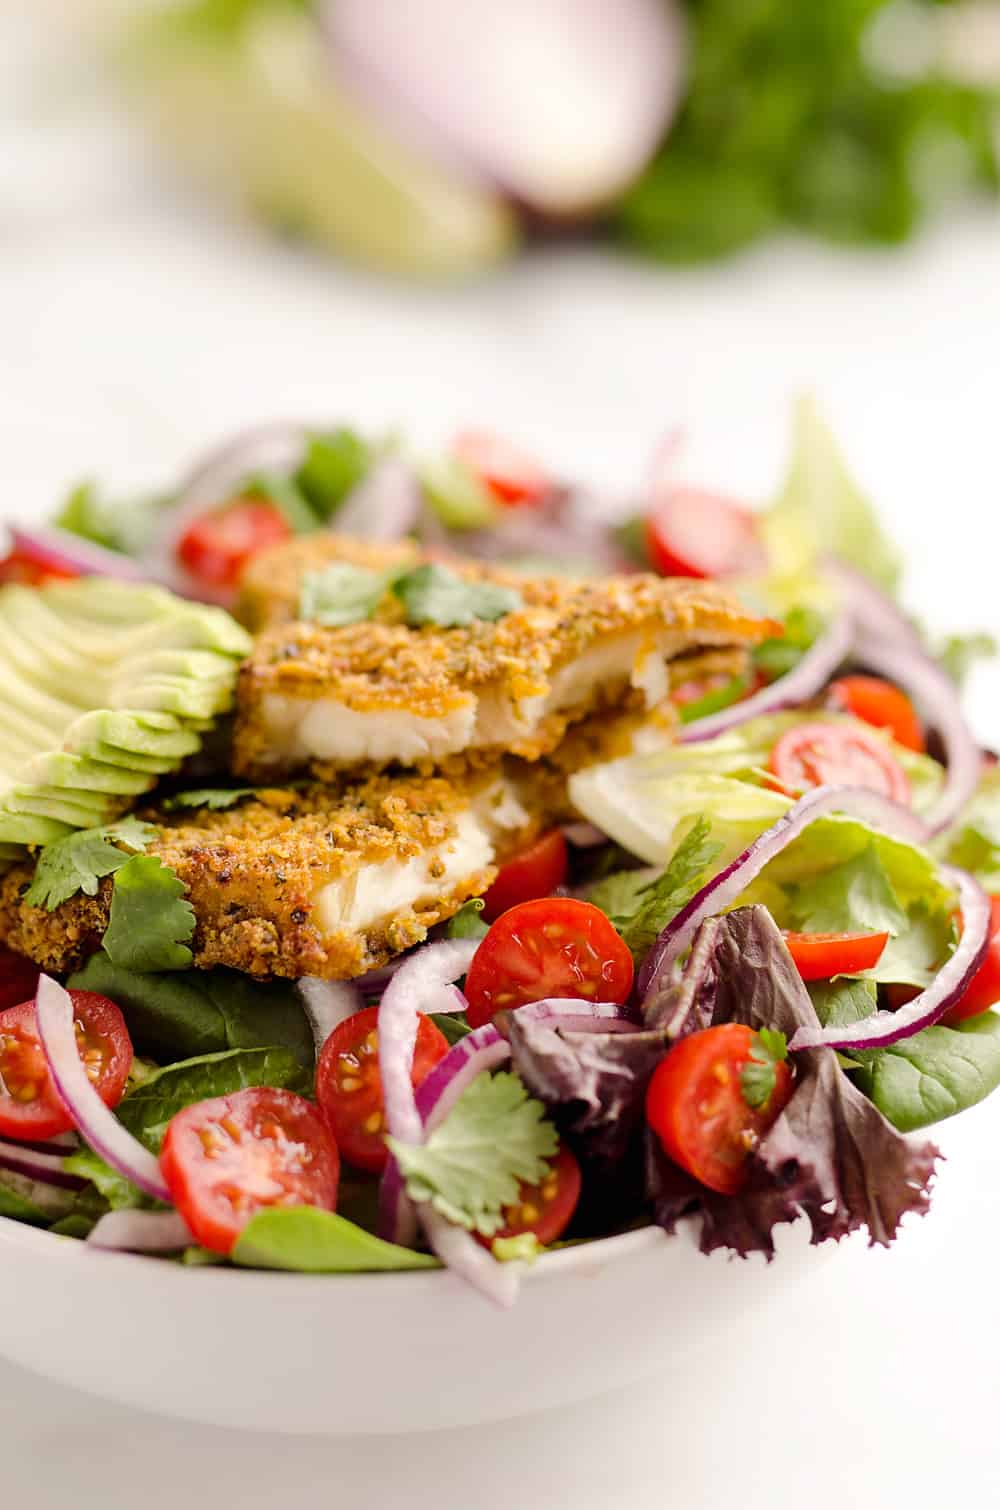 Southwest Tortilla Crusted Tilapia Salad is an easy and healthy dinner idea with a bed of mixed greens topped with tomatoes, avocado, red onion, Tortilla Crusted Tilapia and a homemade Chipotle Lime Dressing. 